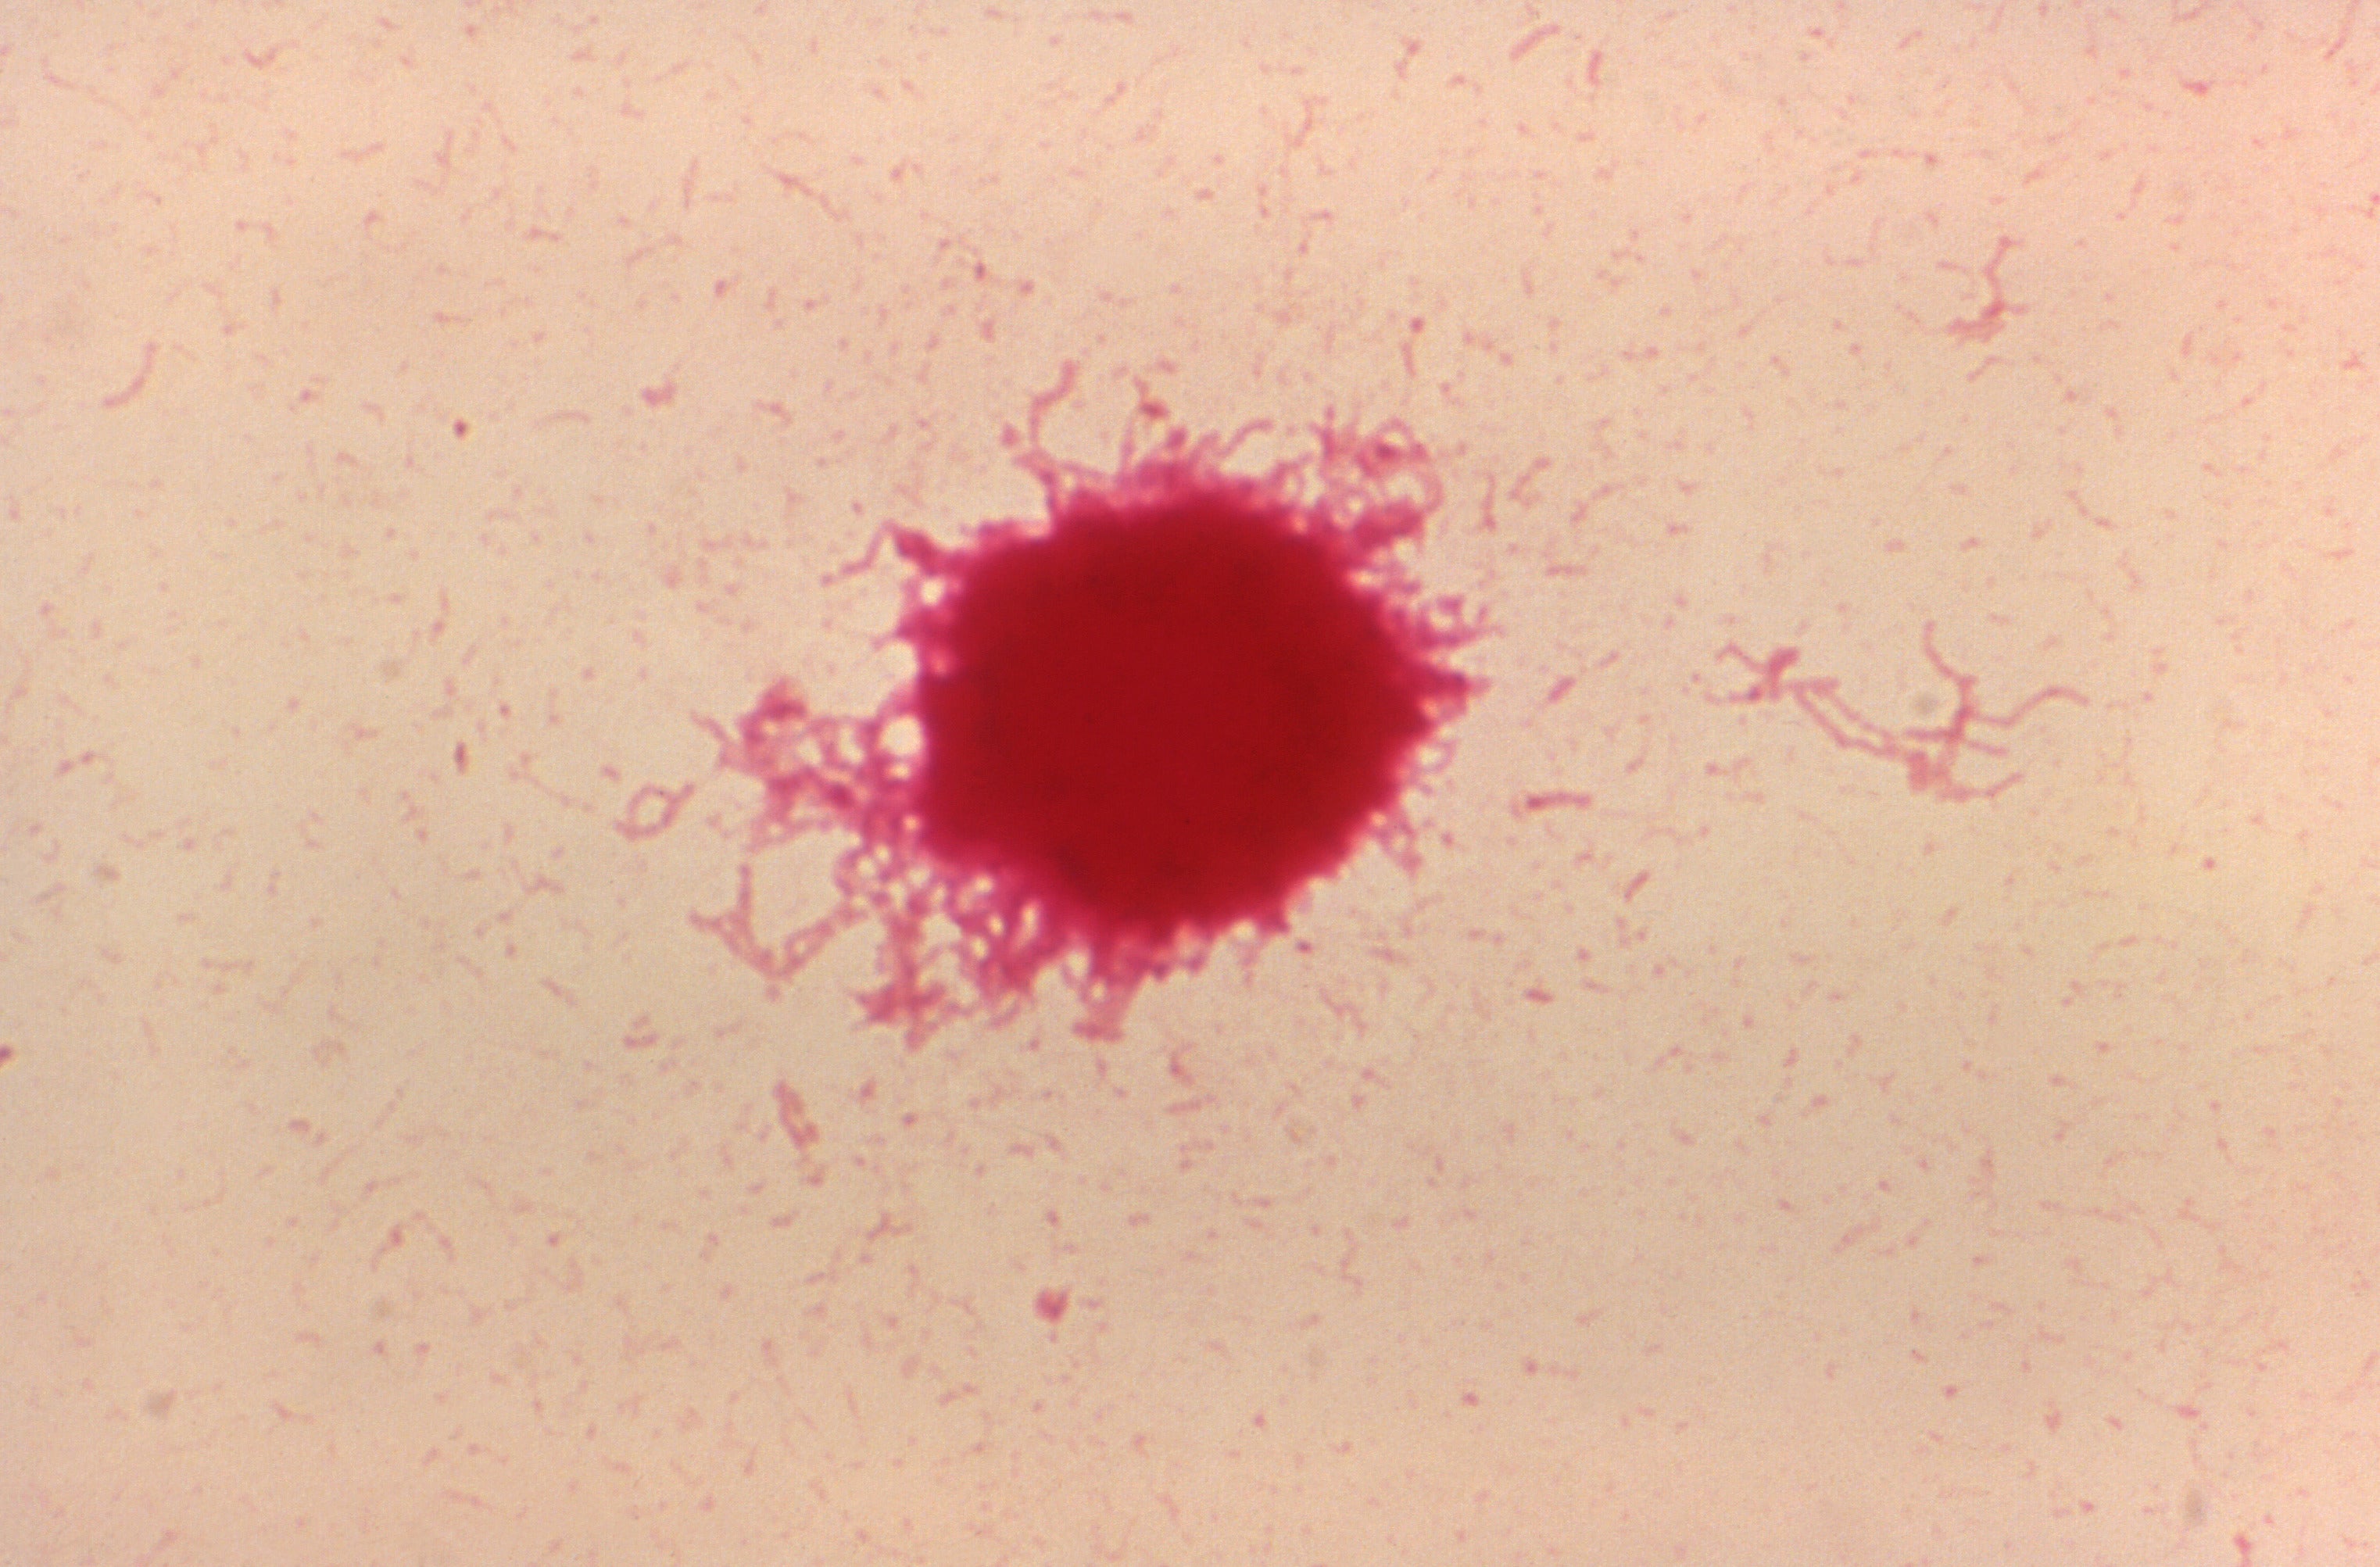 A clump of Haemophilus ducreyi bacteria found in a sample of rabbit blood (Image: CDC/Dr. Greg Hammond)